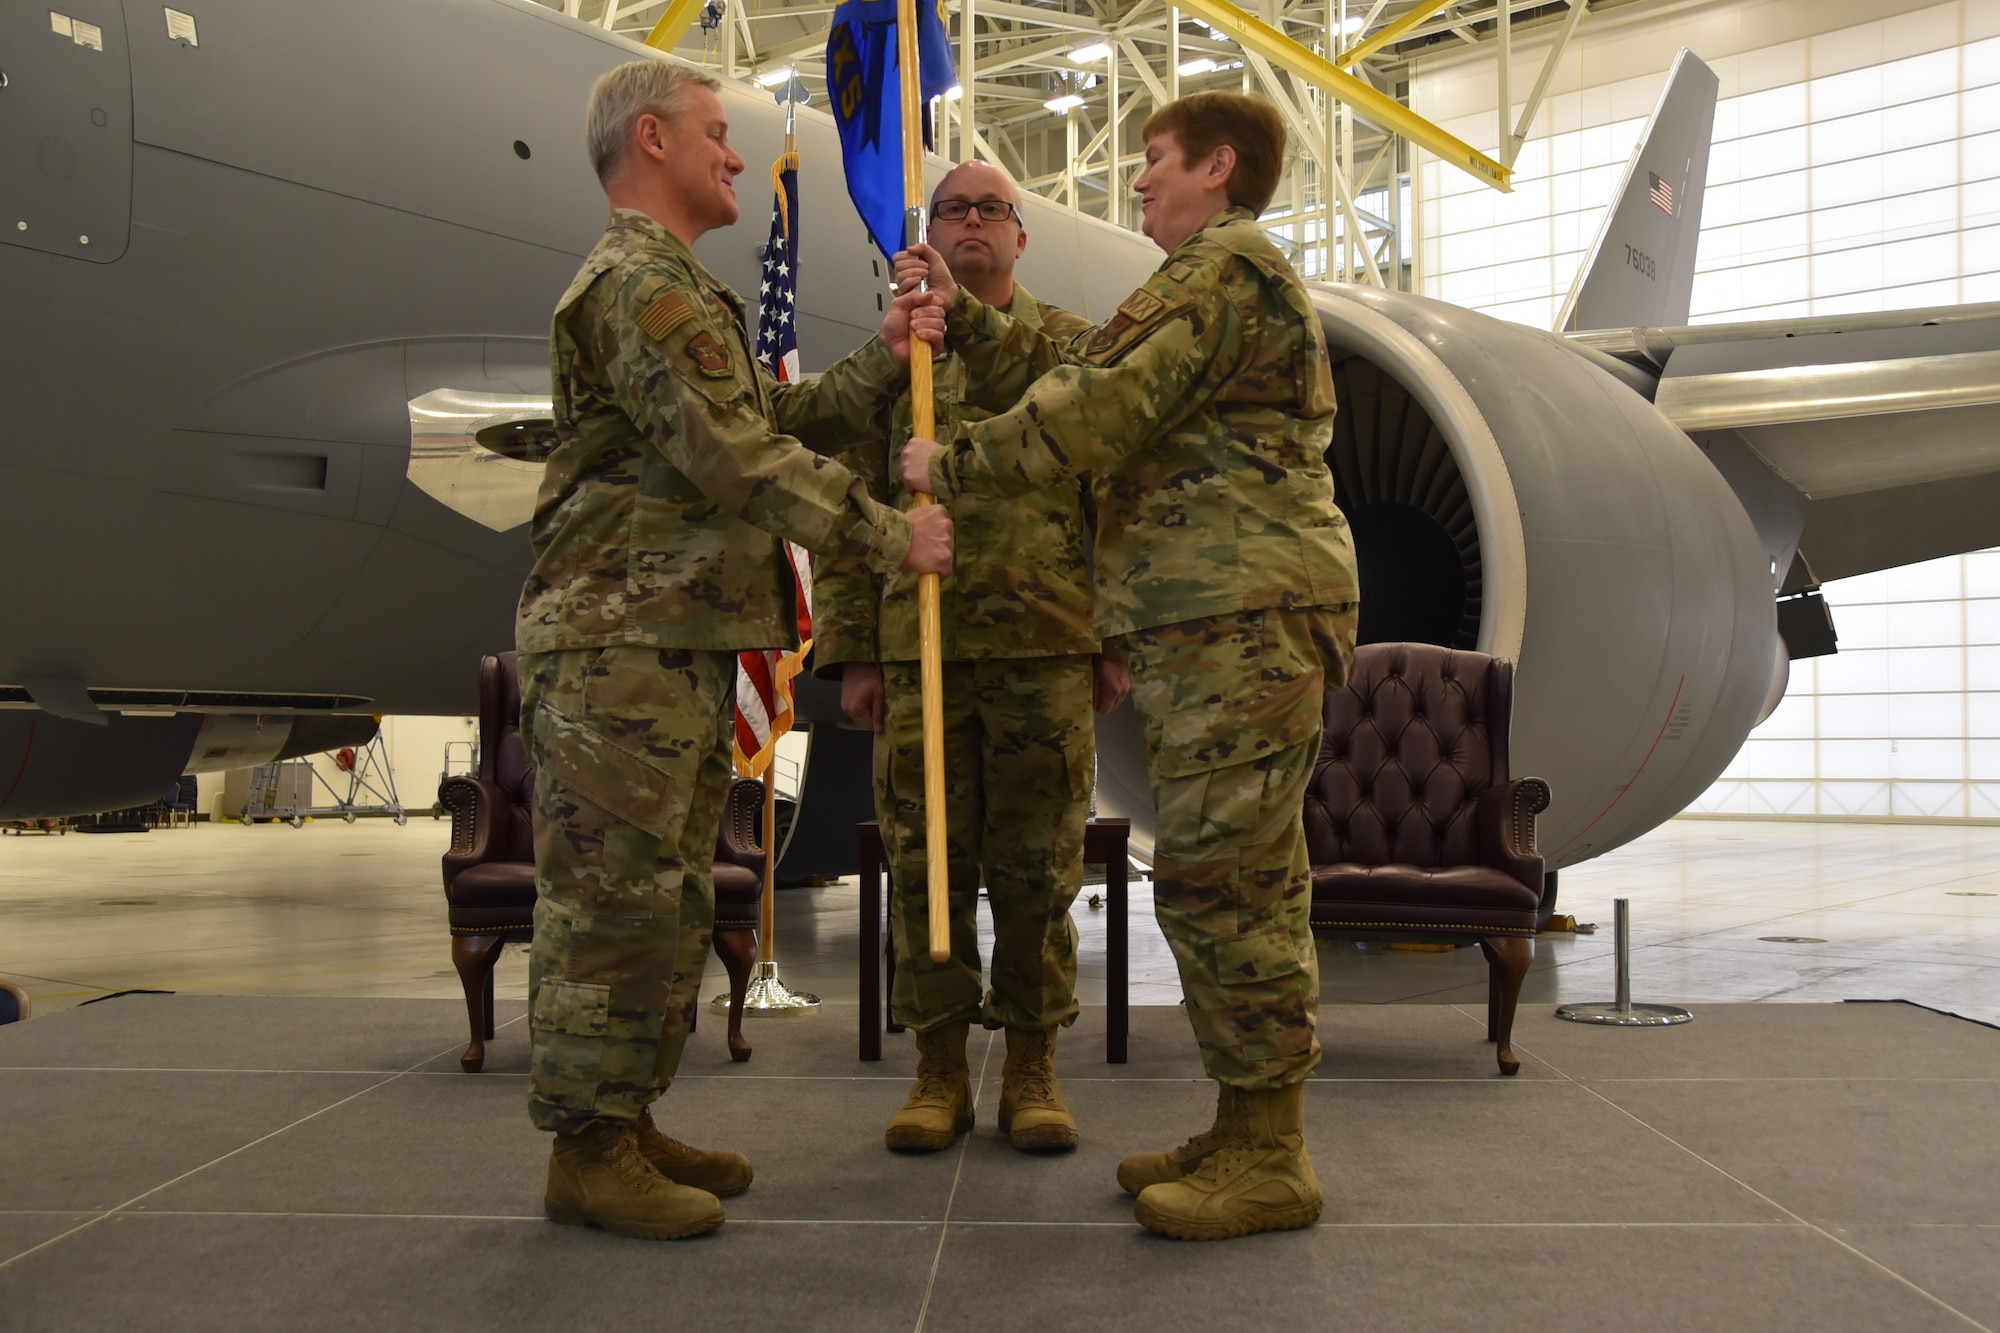 (Left to right) Lt. Col. Pamela Potter, incoming 931st Aircraft Maintenance Squadron commander, receives the guidon from Col. Robert Thompson, 931st Maintenance Group commander, on a stage in a hangar with a KC-46A Pegasus in the background.